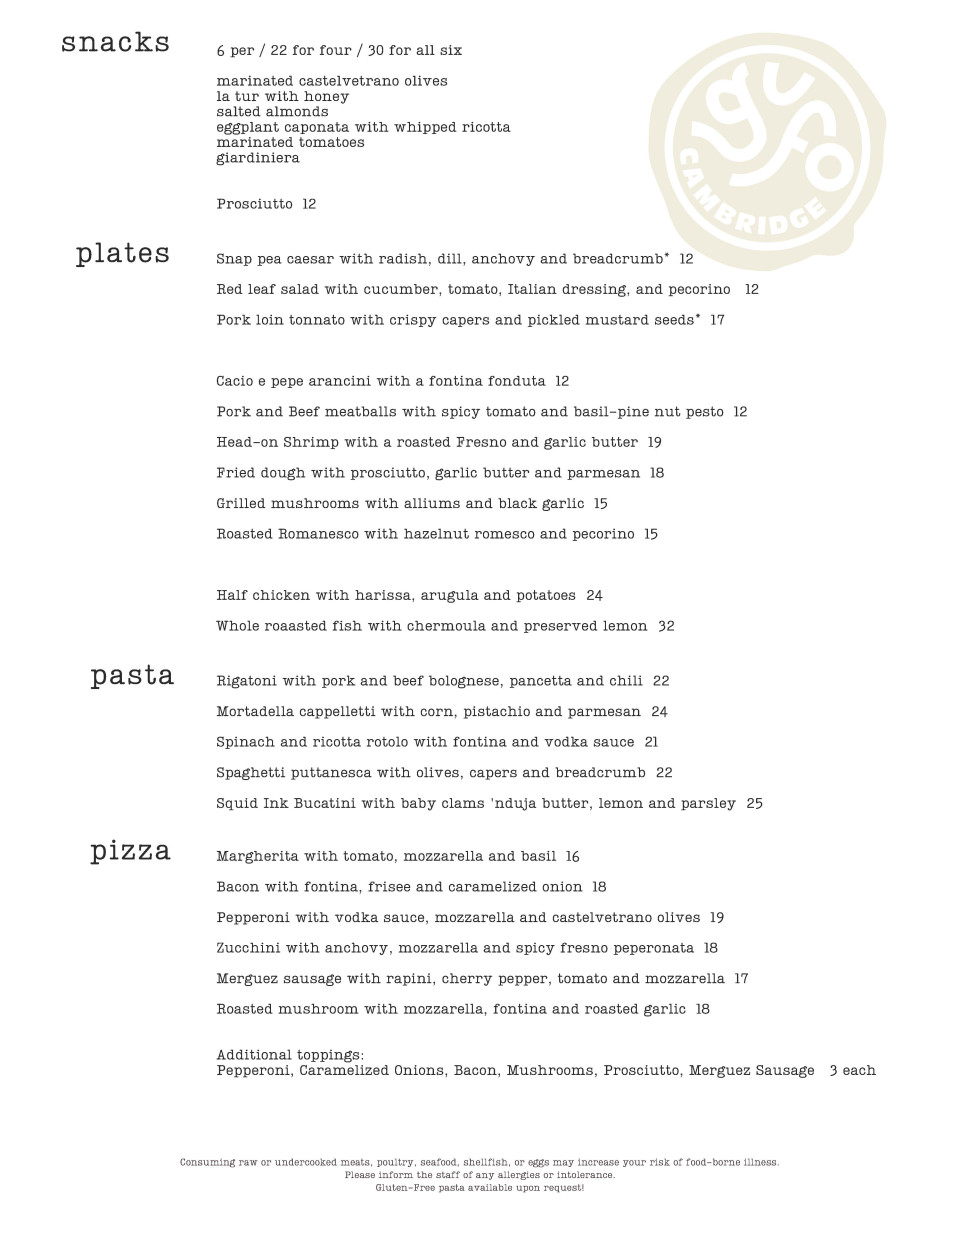 A page of an Italian restaurant menu with pasta, pizza, and more.